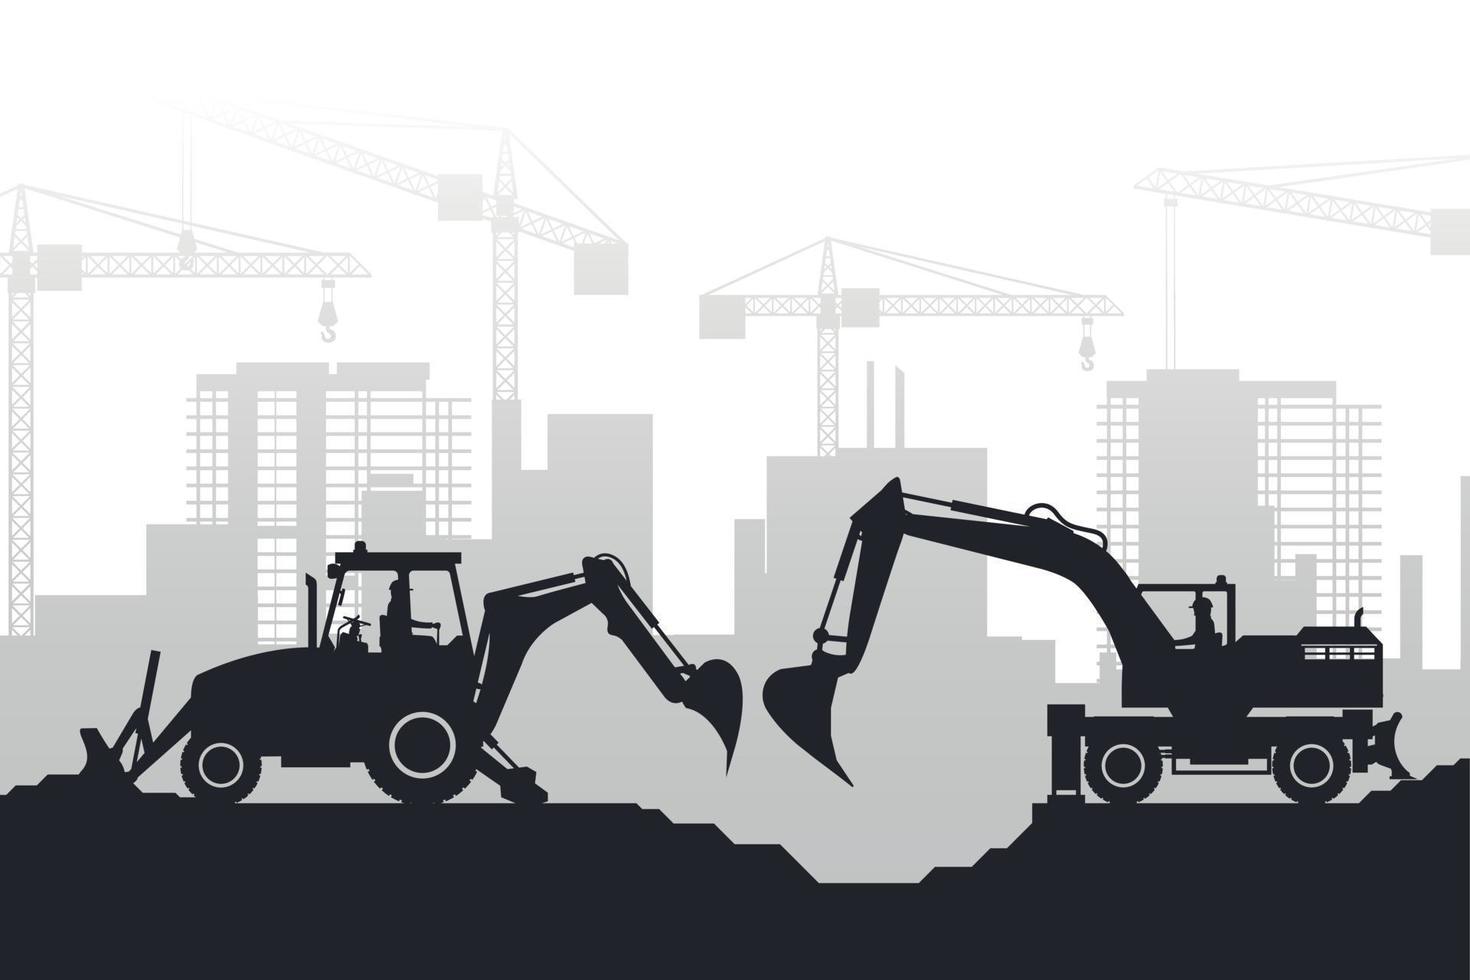 Background of buildings under construction and heavy machinery with silhouettes of backhoe and wheel excavator vector